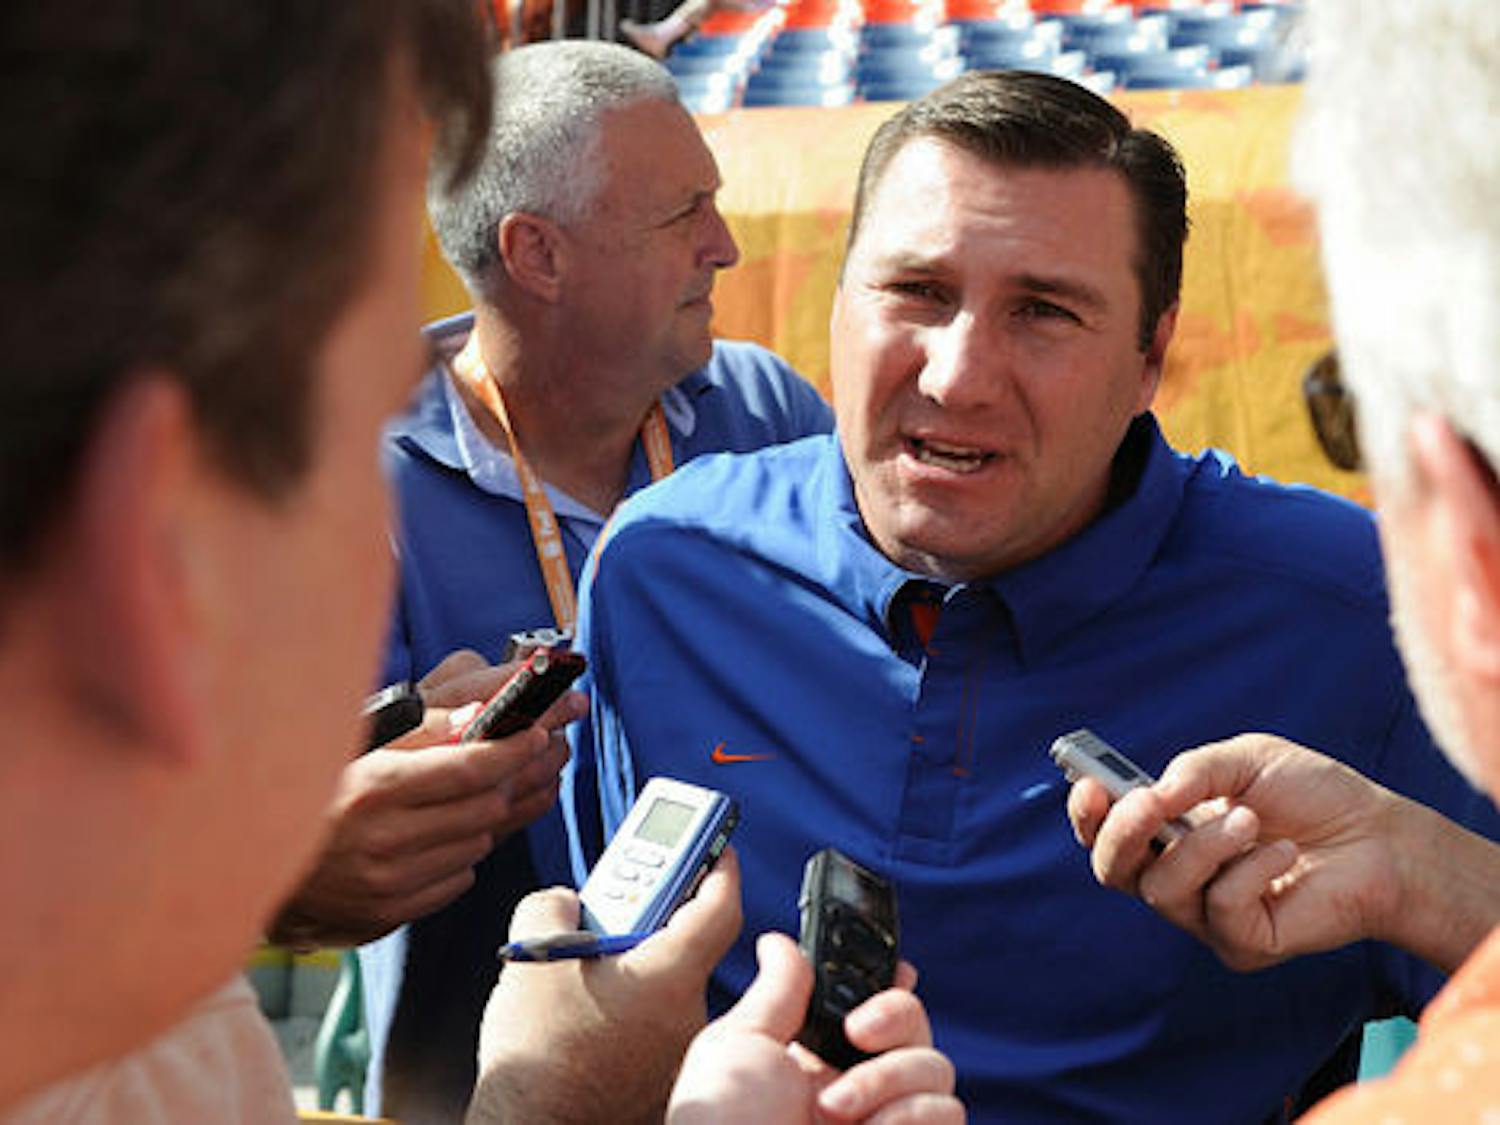 Former Mississippi State coach and Florida offensive coordinator Dan Mullen agreed to become the Gators next head coach, the school announced Sunday evening.